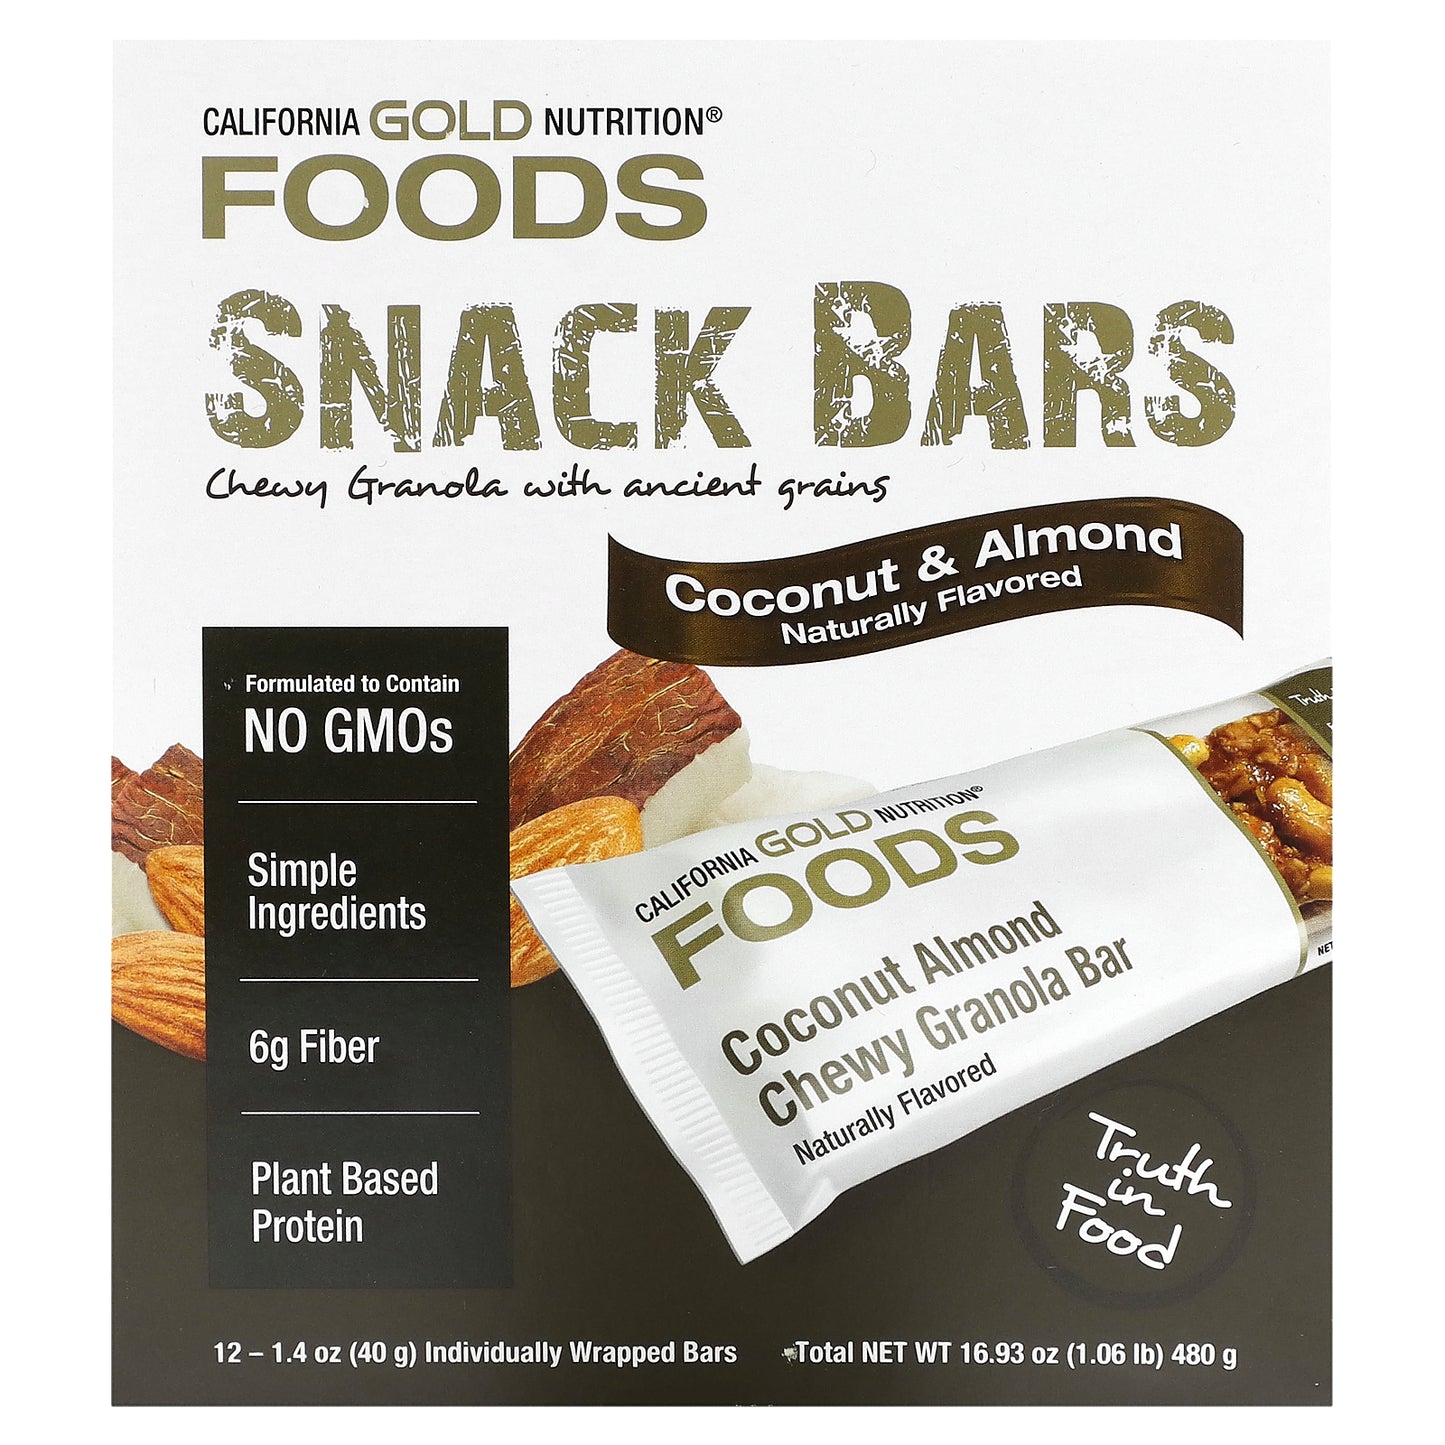 California Gold Nutrition, FOODS - Coconut Almond Chewy Granola Bars, 12 Bars, 1.4 oz (40 g) Each